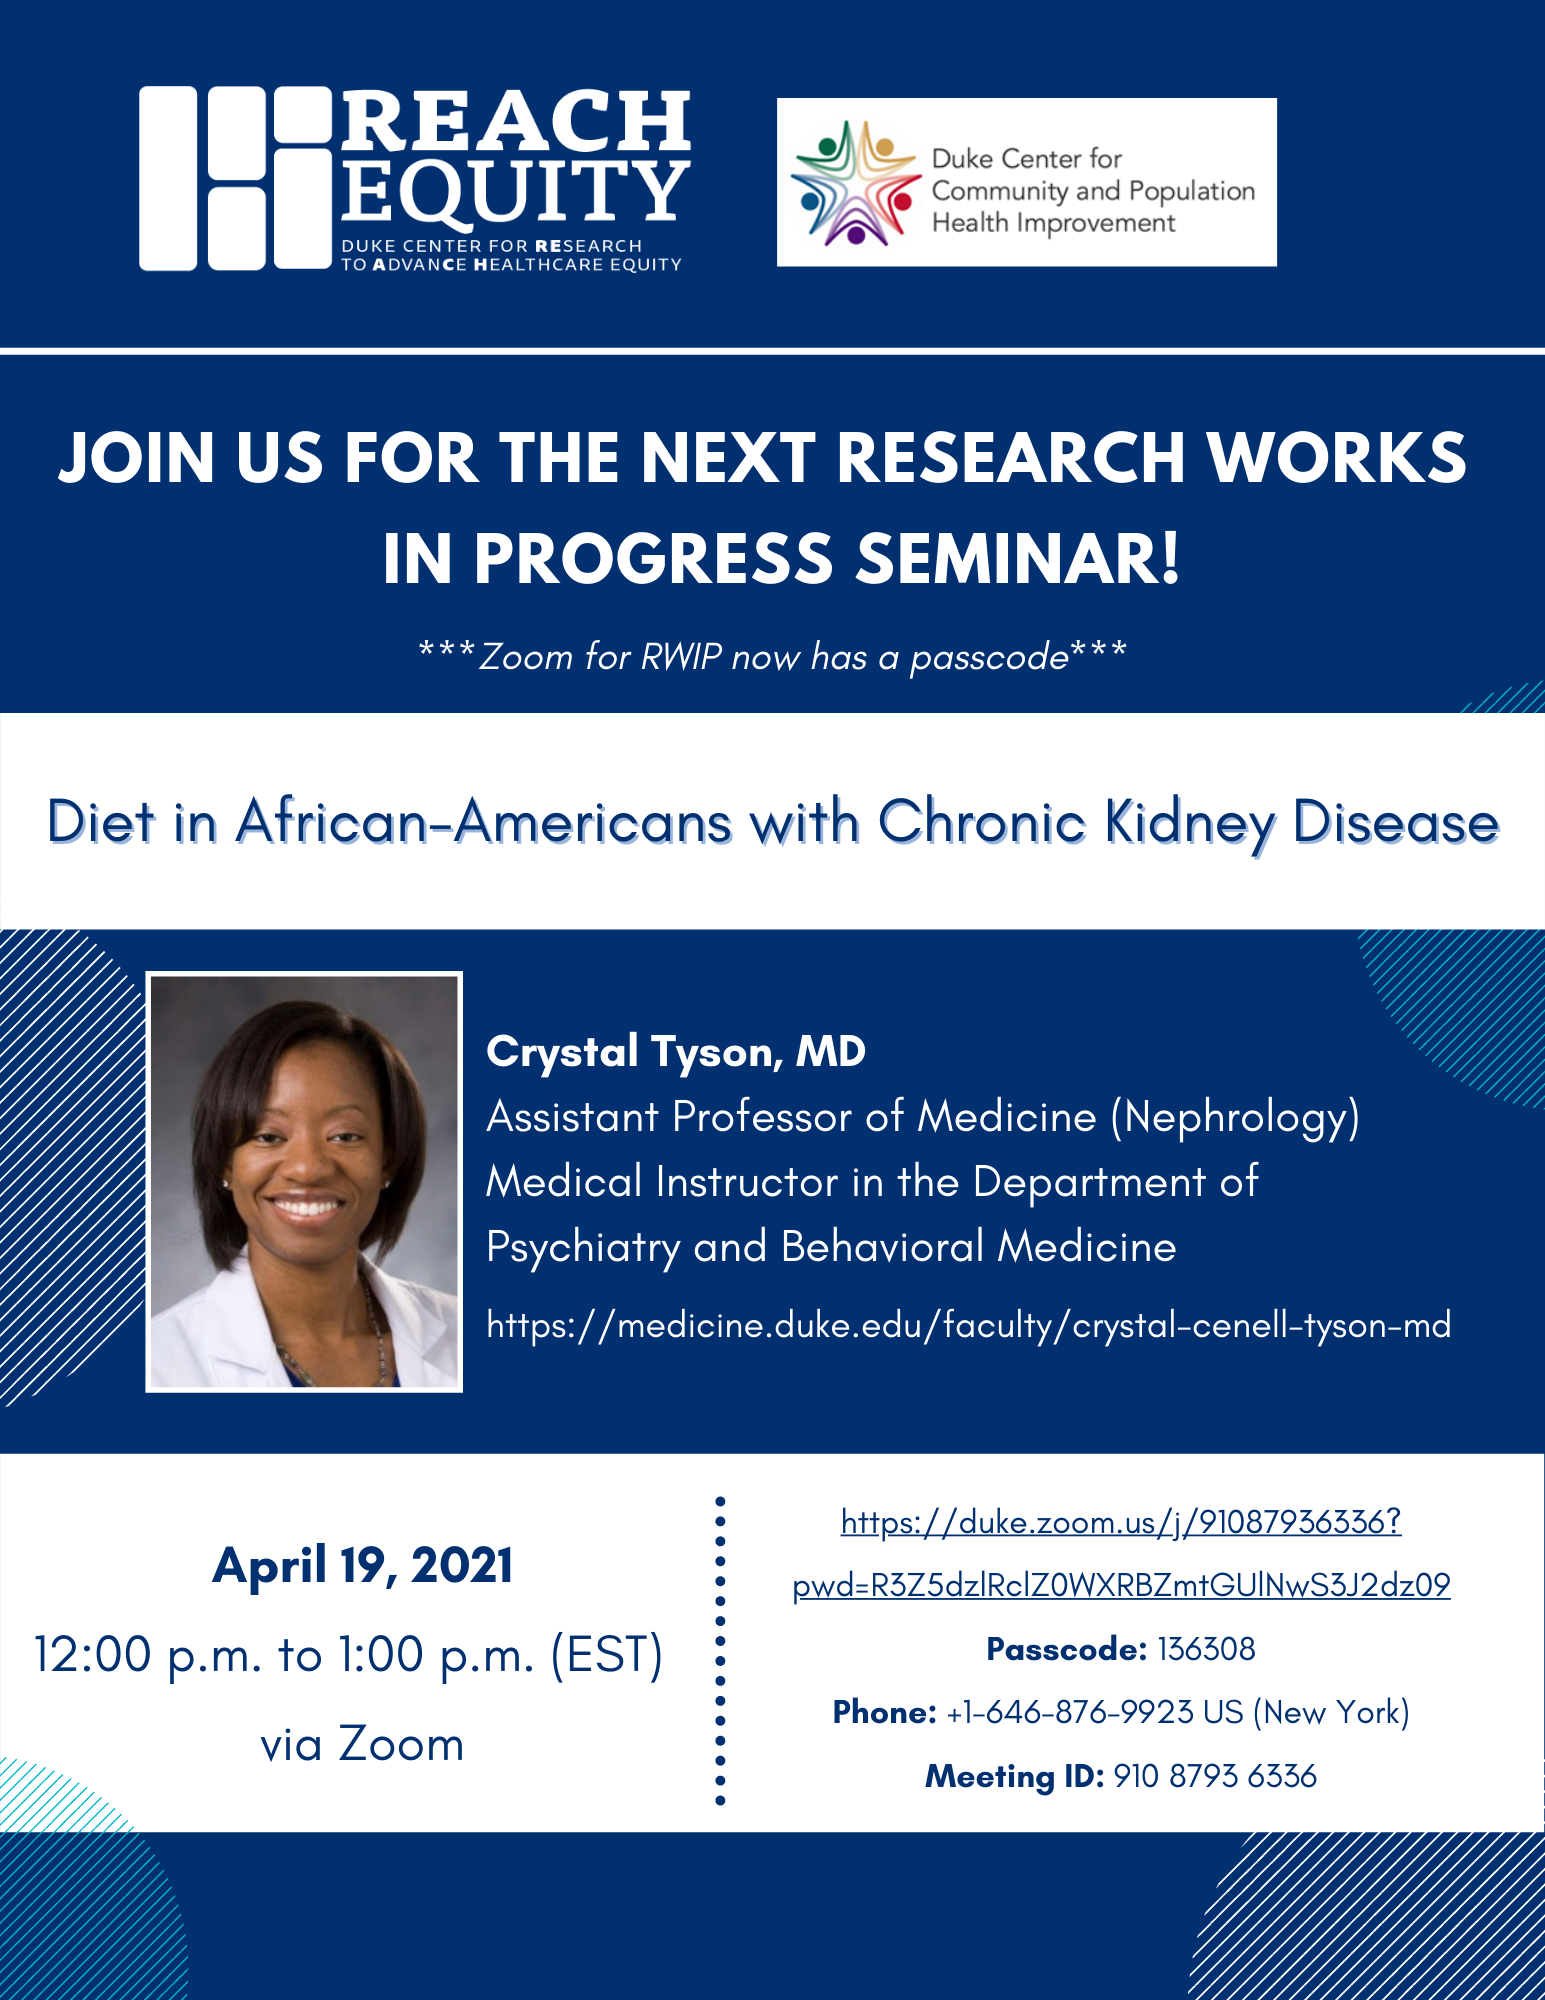 Dr. Crystal Tyson presents Diet in African-Americans with Chronic Kidney Disease at Health Disparities Research Works in Progress